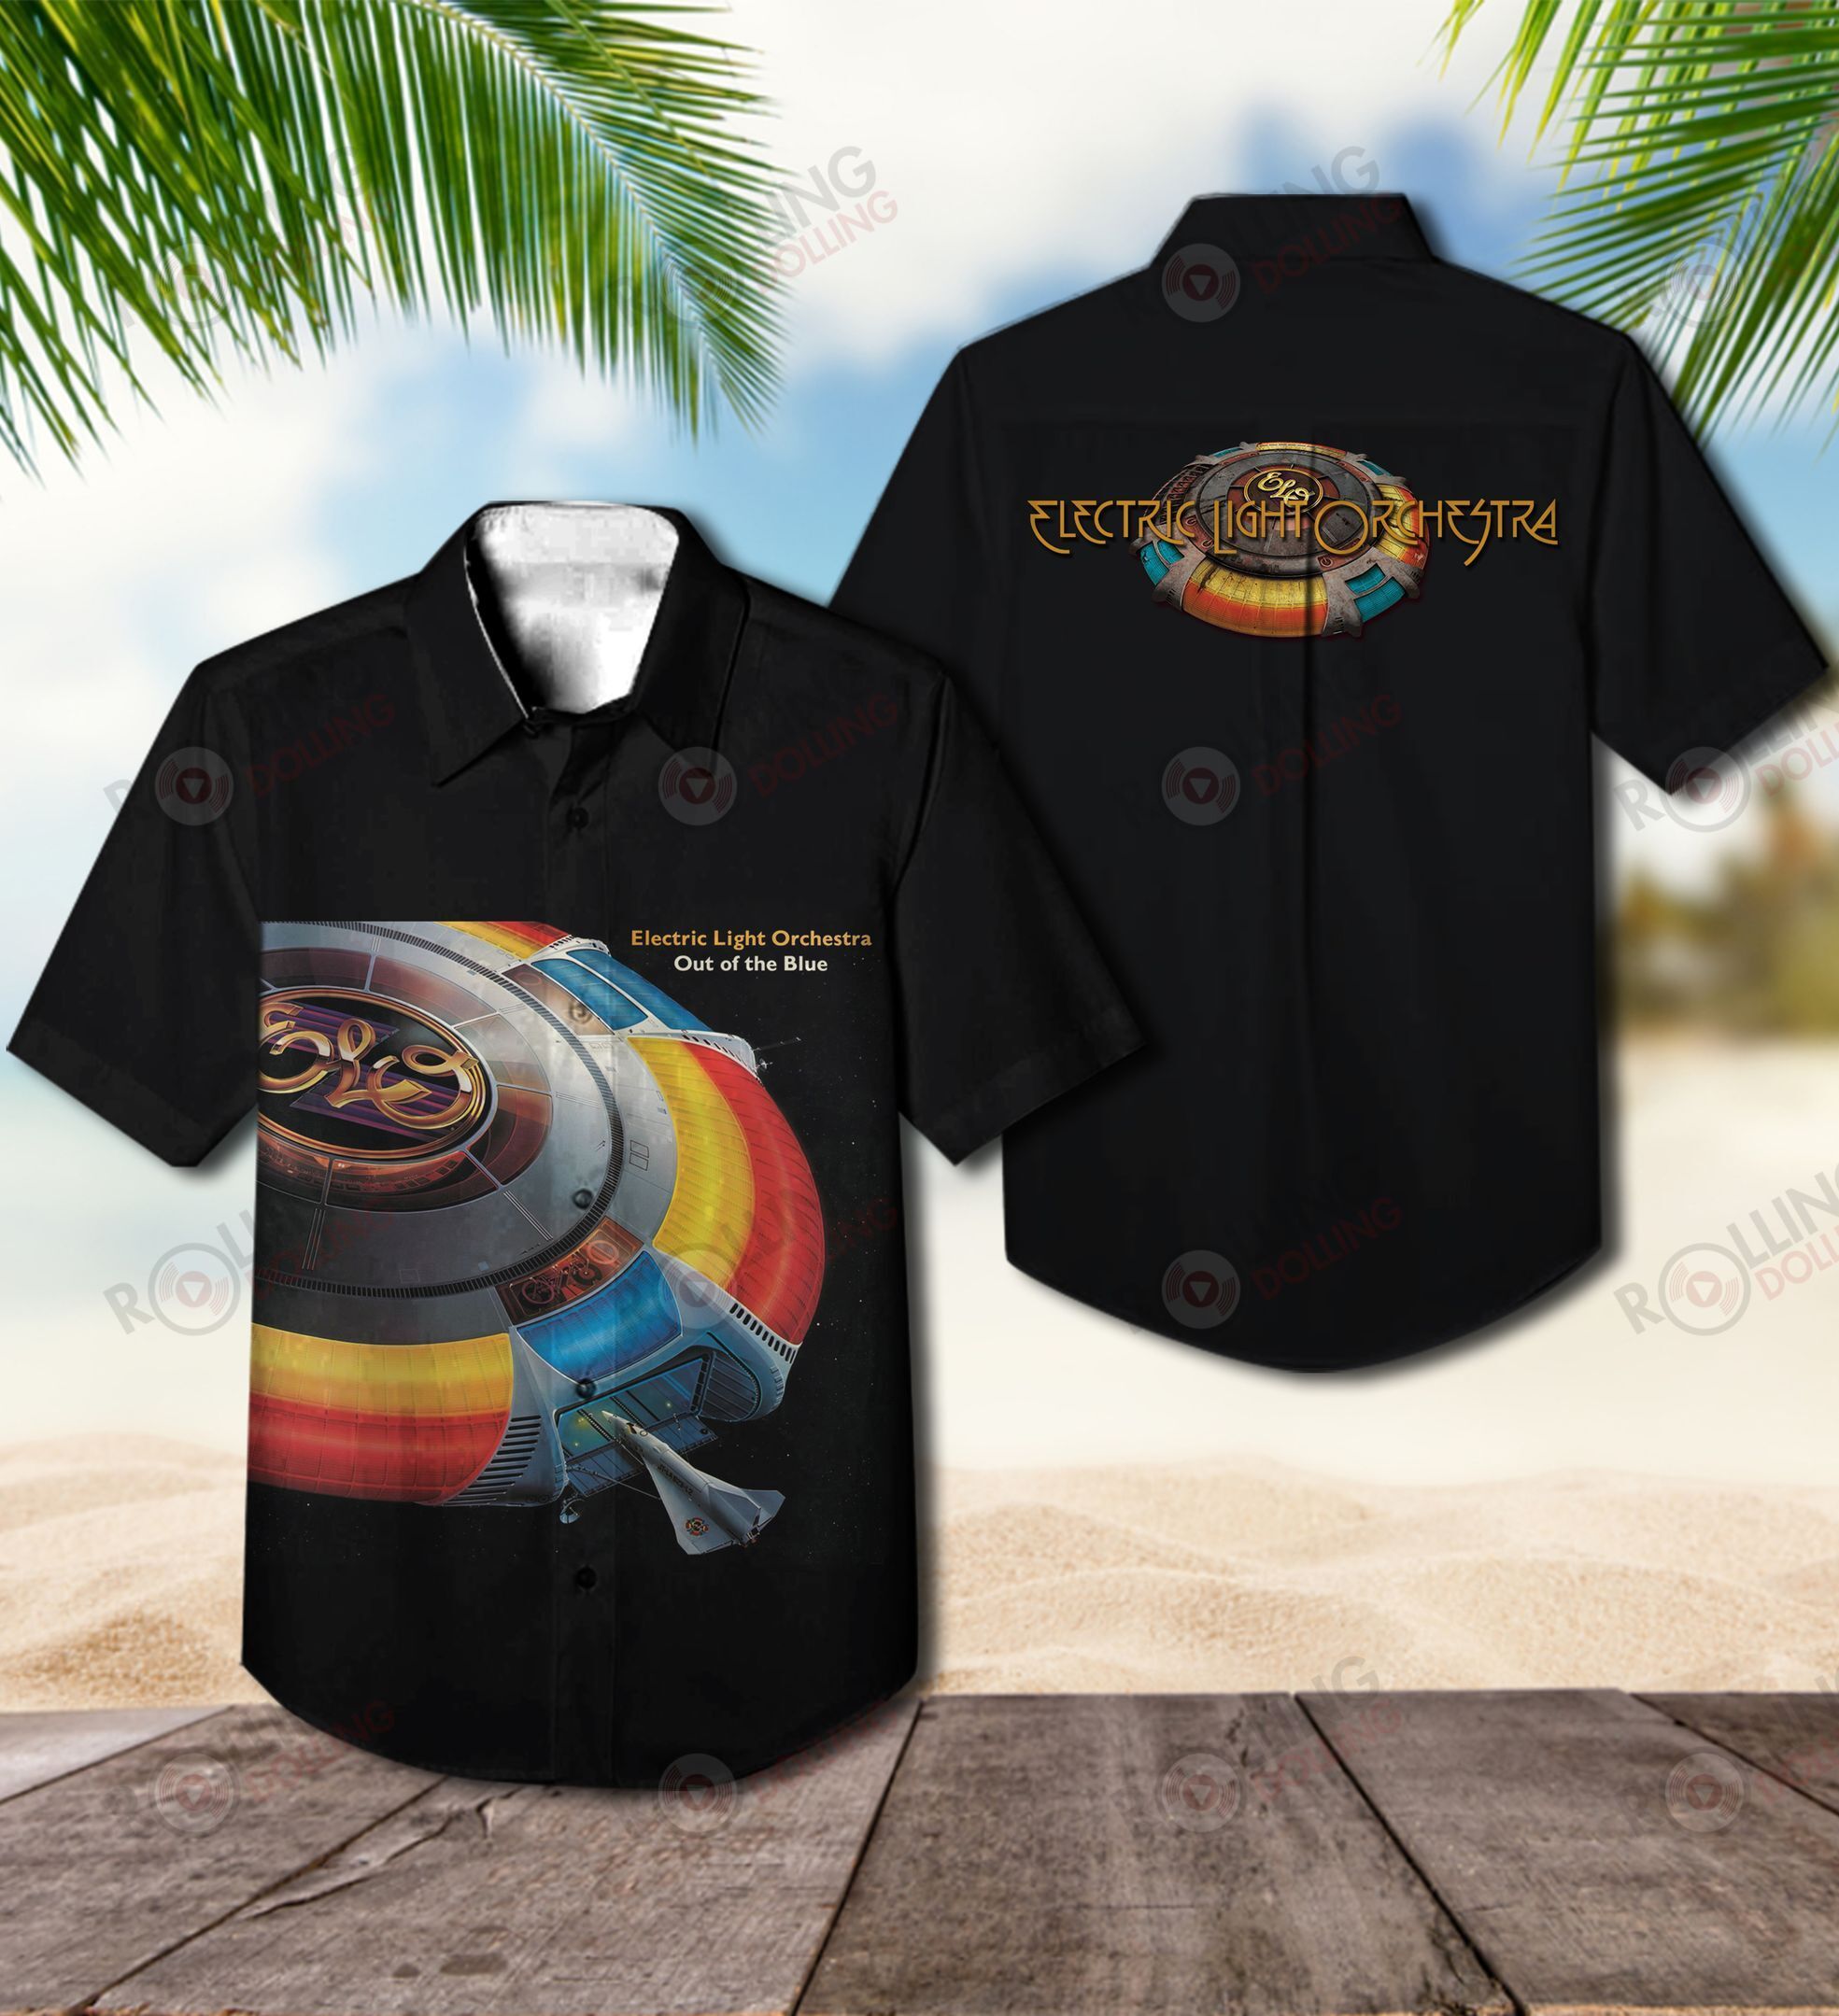 This would make a great gift for any fan who loves Hawaiian Shirt as well as Rock band 124